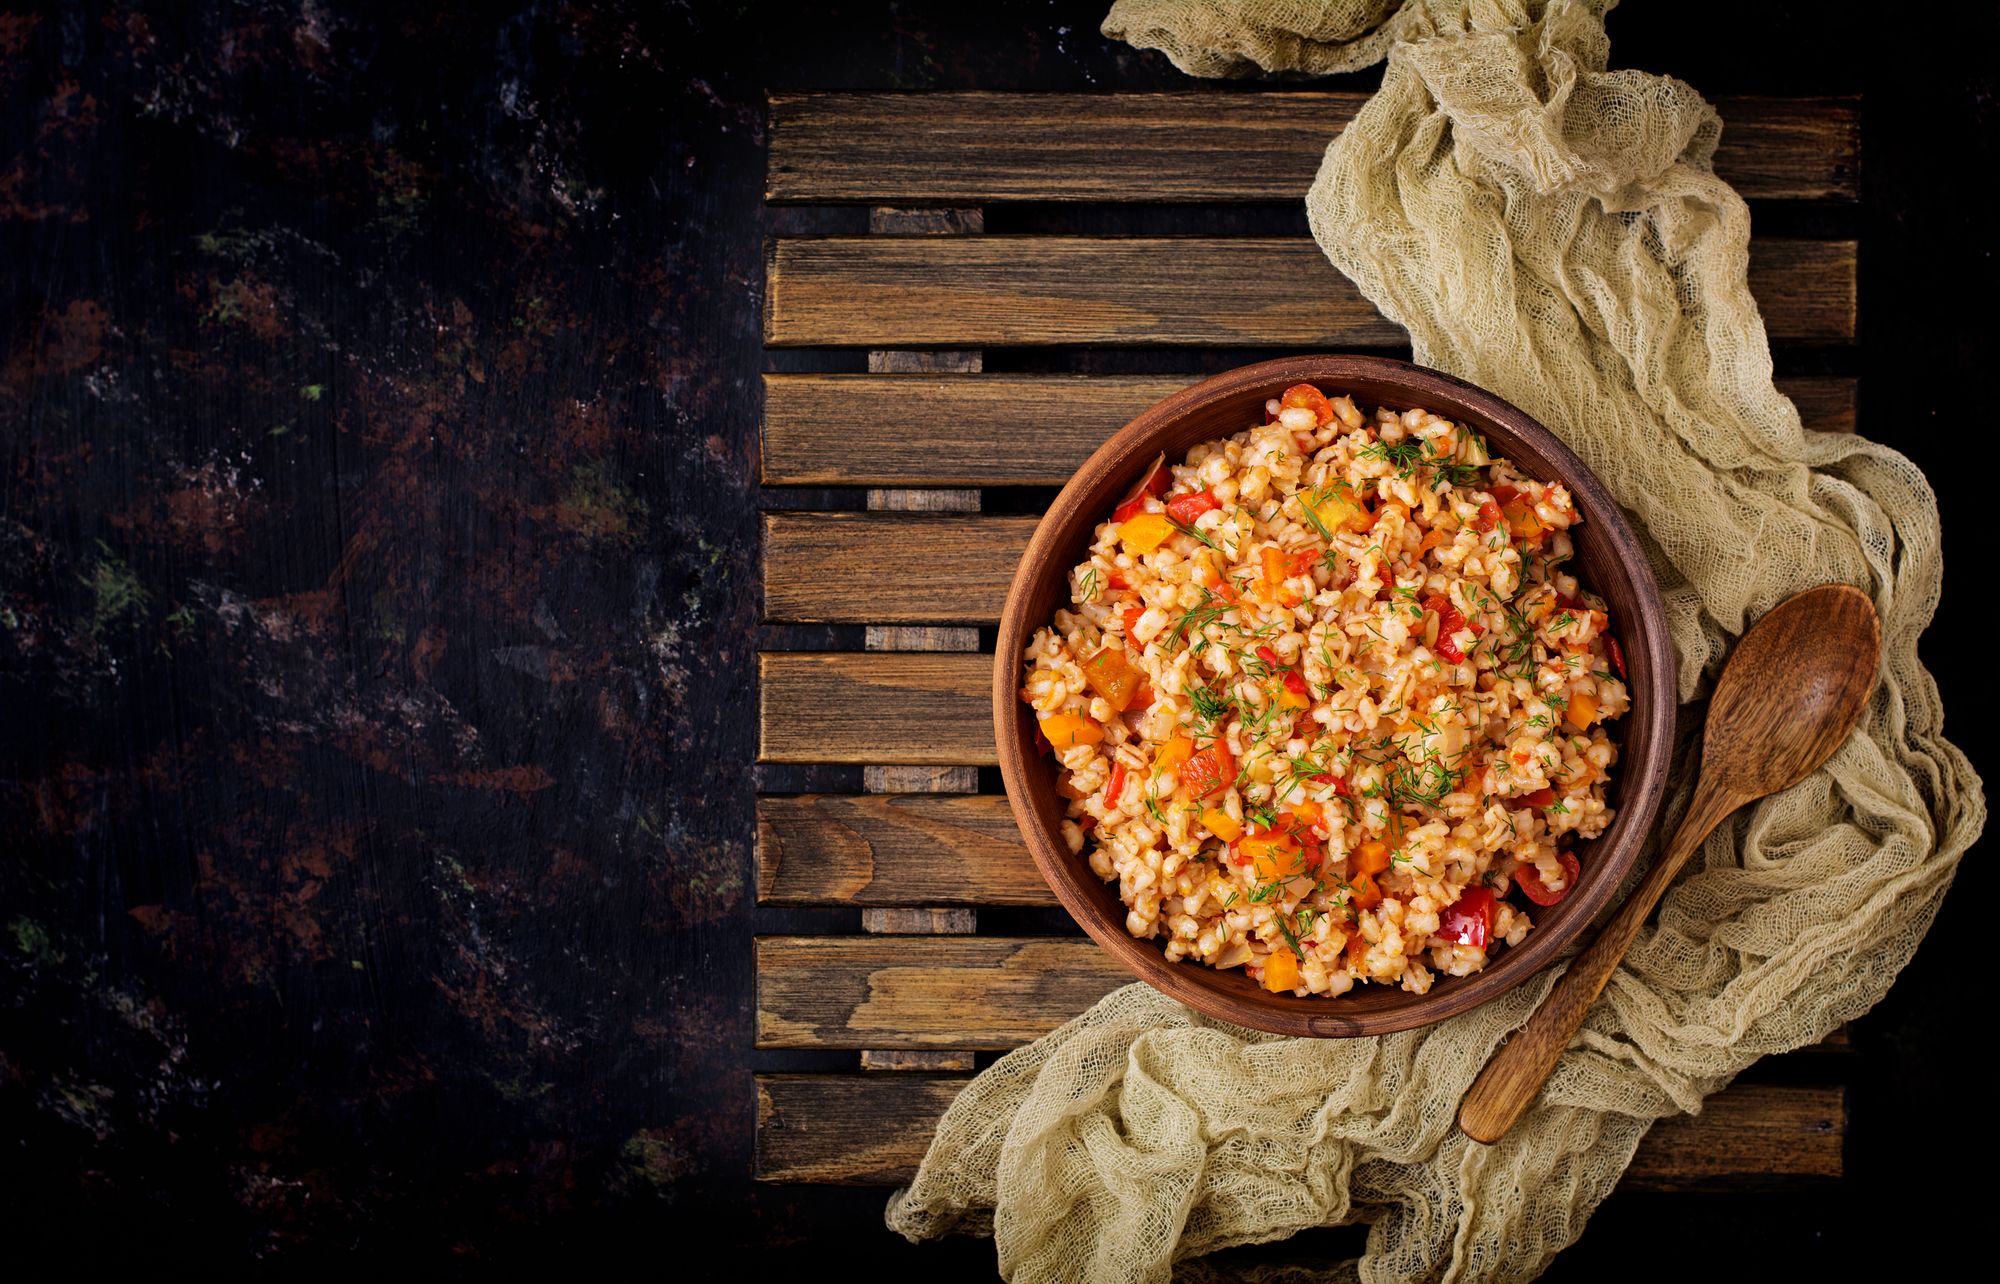 Tomato, Fennel, and Barley Stew